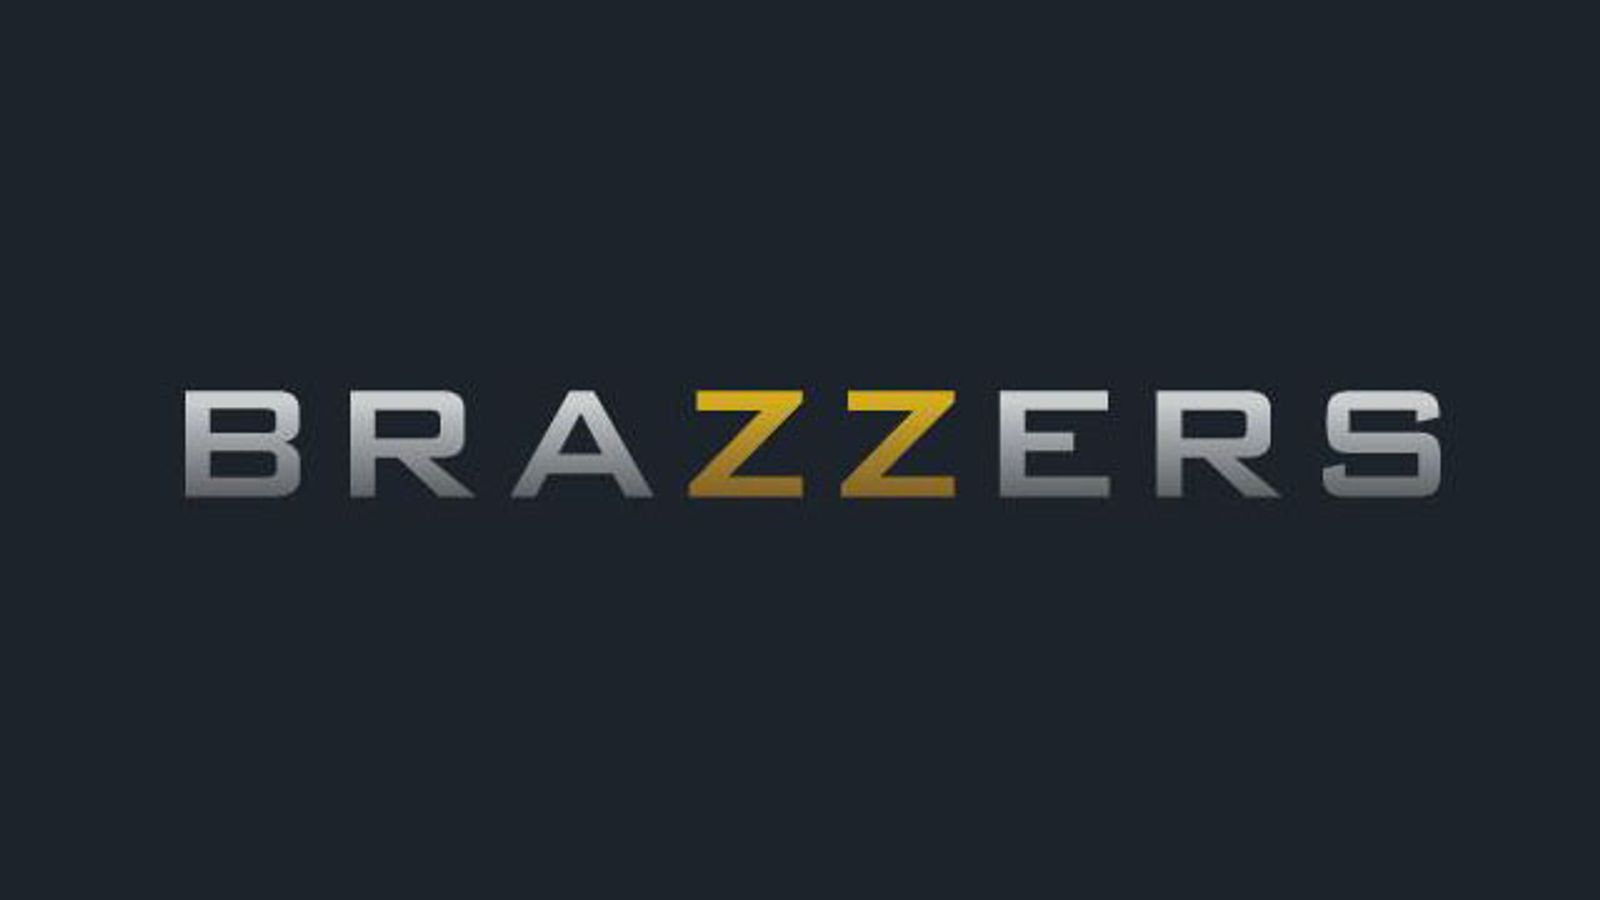 Brazzers.com Holds Audition for Producers to Win $1M Contract